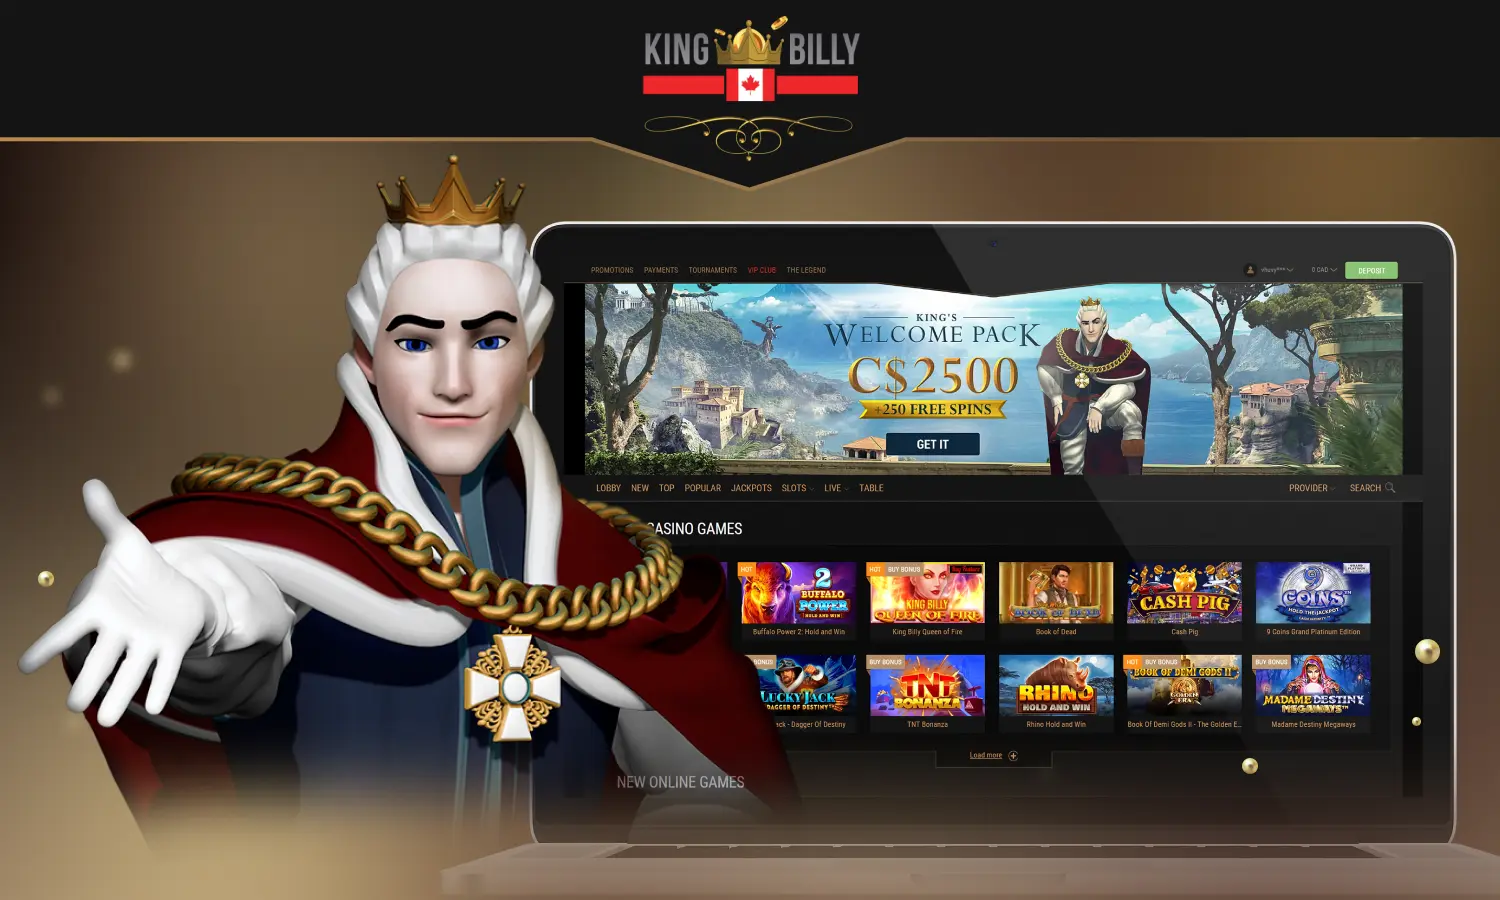 The official Canadian website of King Billy Casino delights users with a wide range of entertainment from 2000+ games